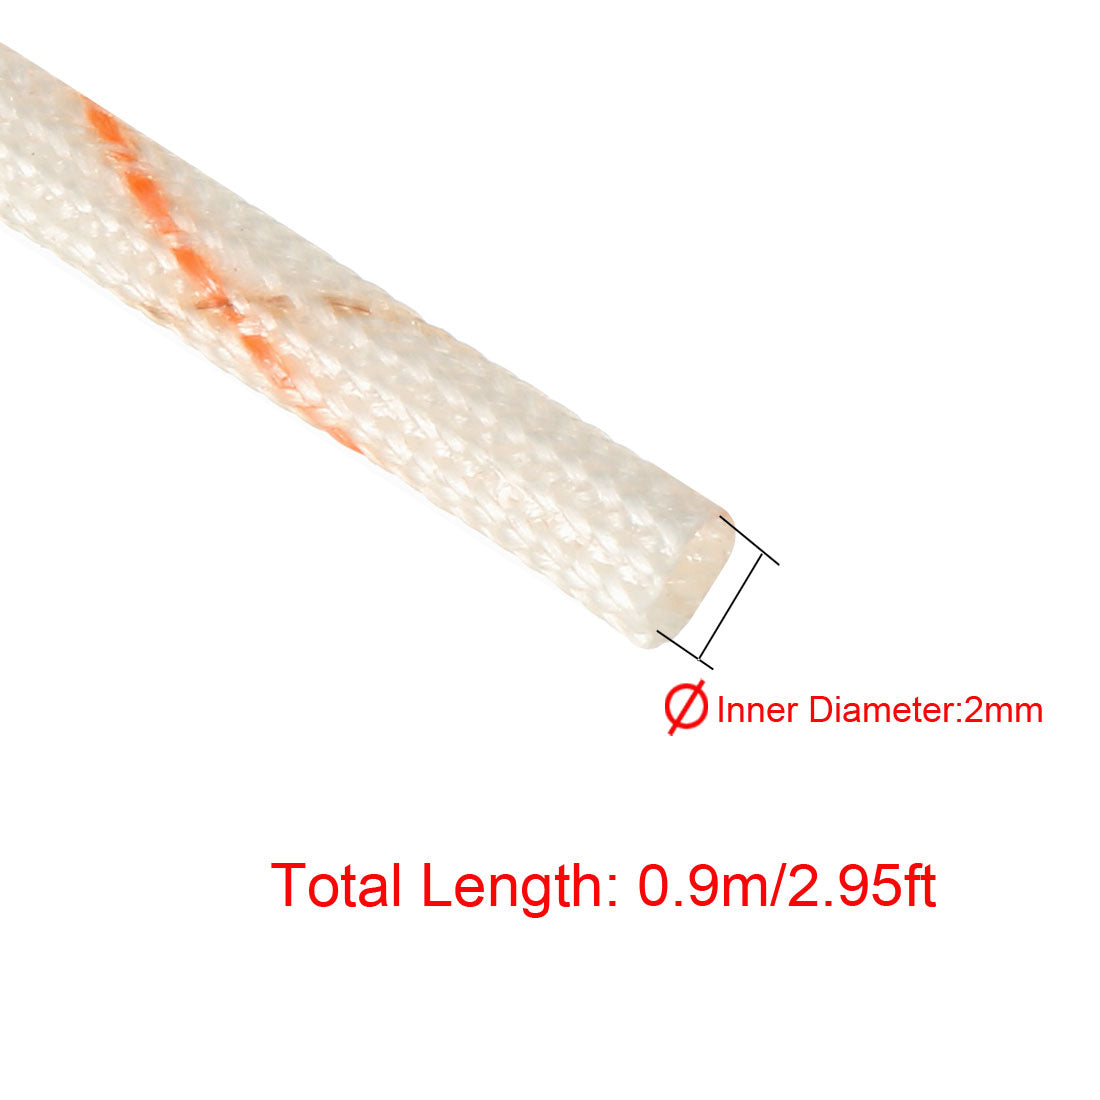 uxcell Uxcell Fiberglass Sleeve 2mm I.D. PVC Insulation Tubing 1500V Tube Adjustable Sleeving Pipe 125 Degree Centigrade Cable Wrap Wire 900mm 2.95ft 5Pcs